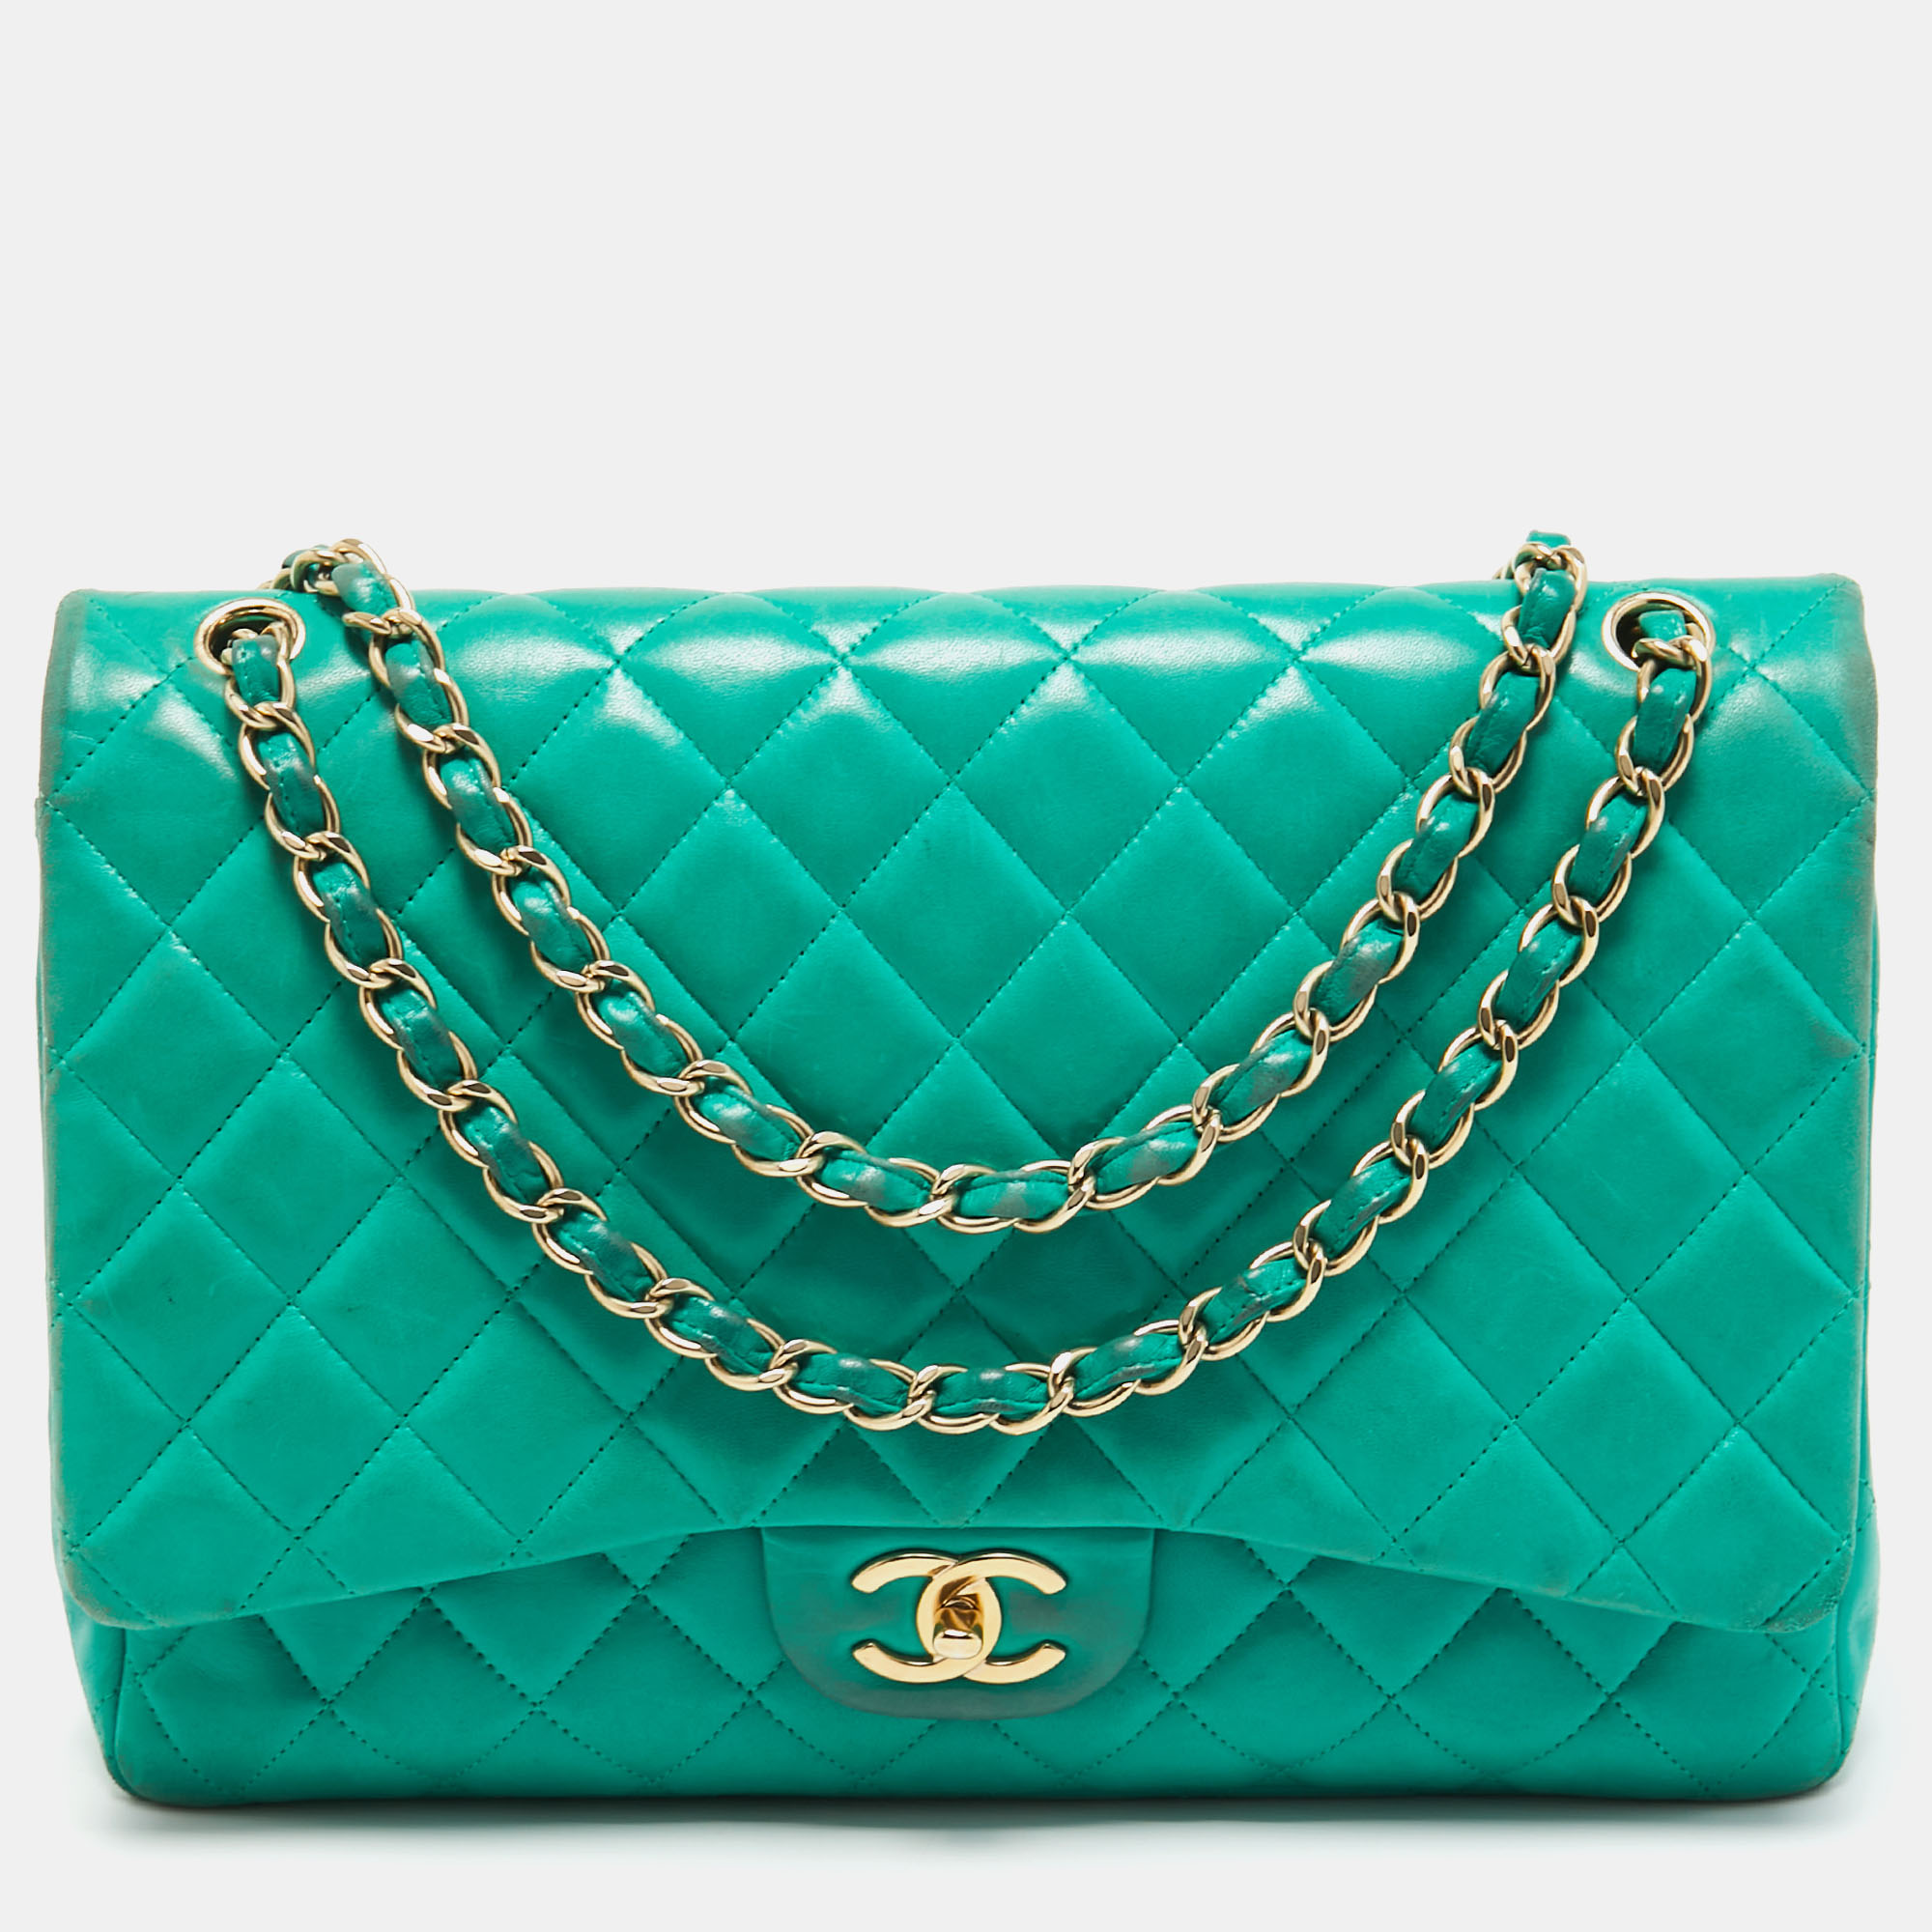 Pre-owned Chanel Green Quilted Lambskin Leather Maxi Classic